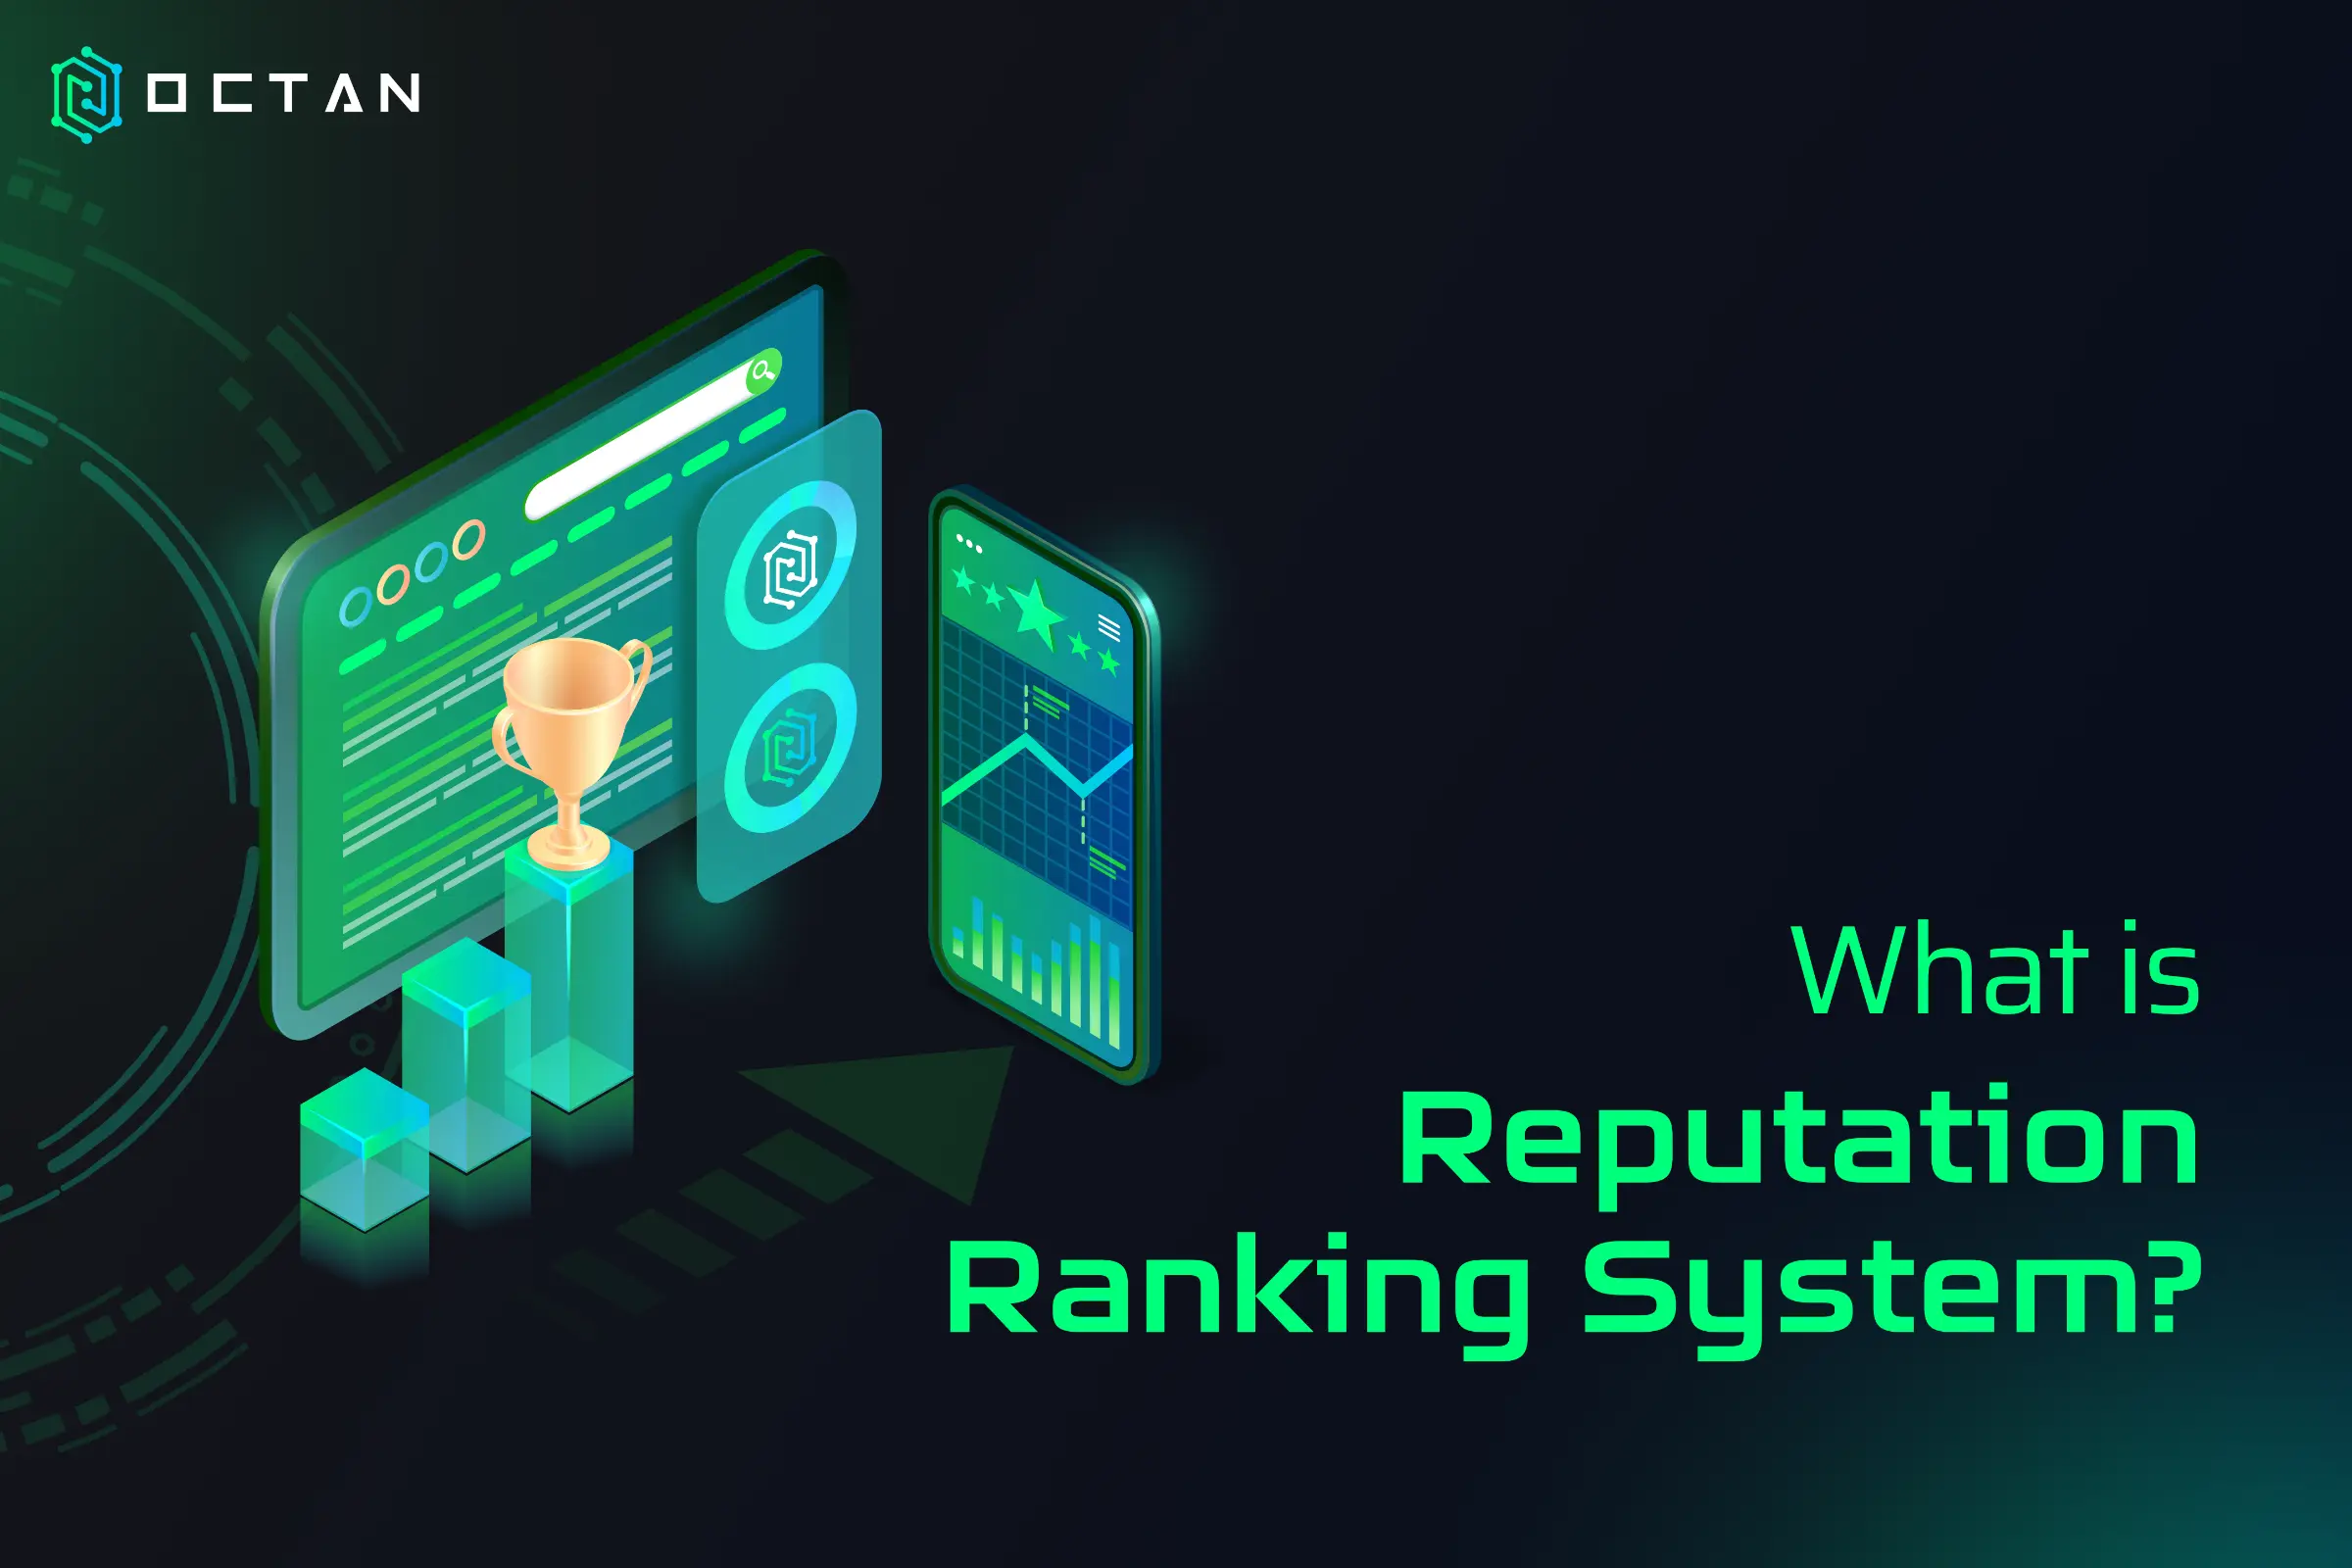 What is Reputation Ranking System